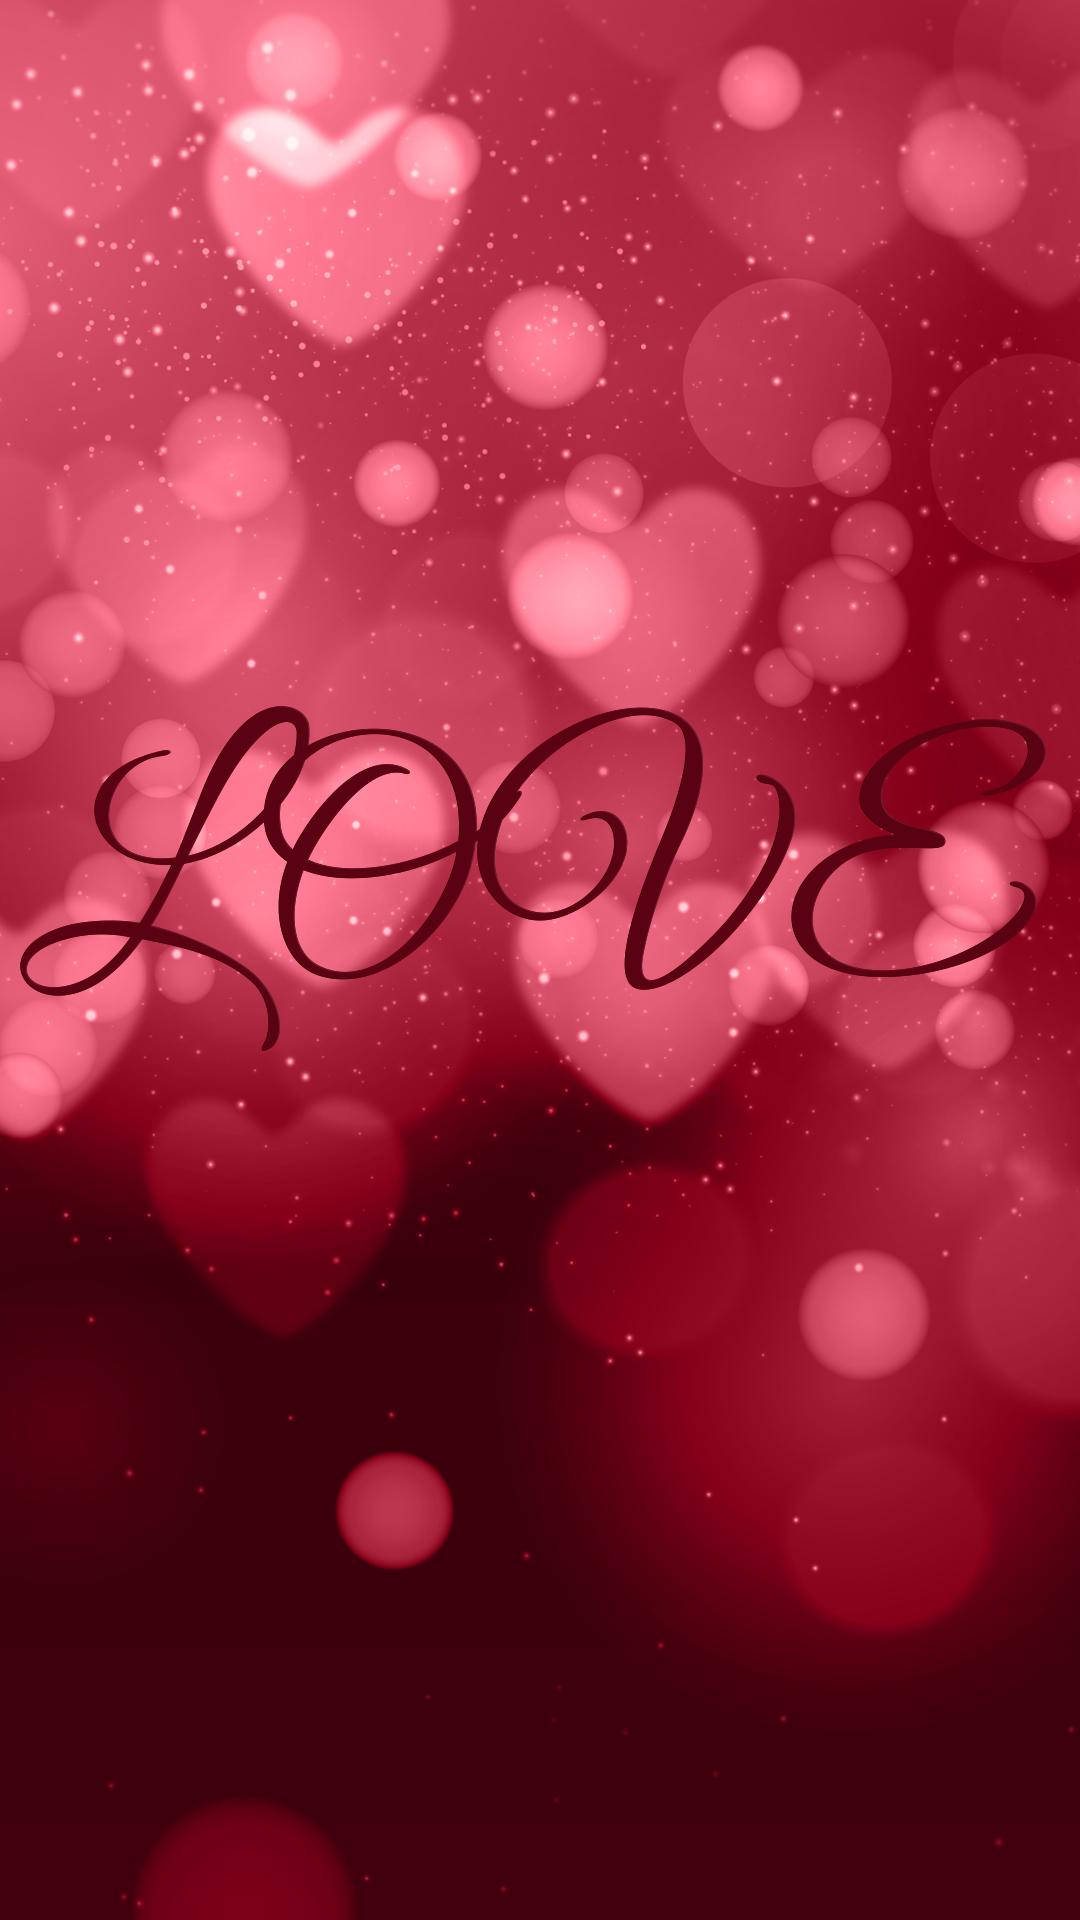 Free Love Phone Wallpaper Downloads, [100+] Love Phone Wallpapers for FREE  